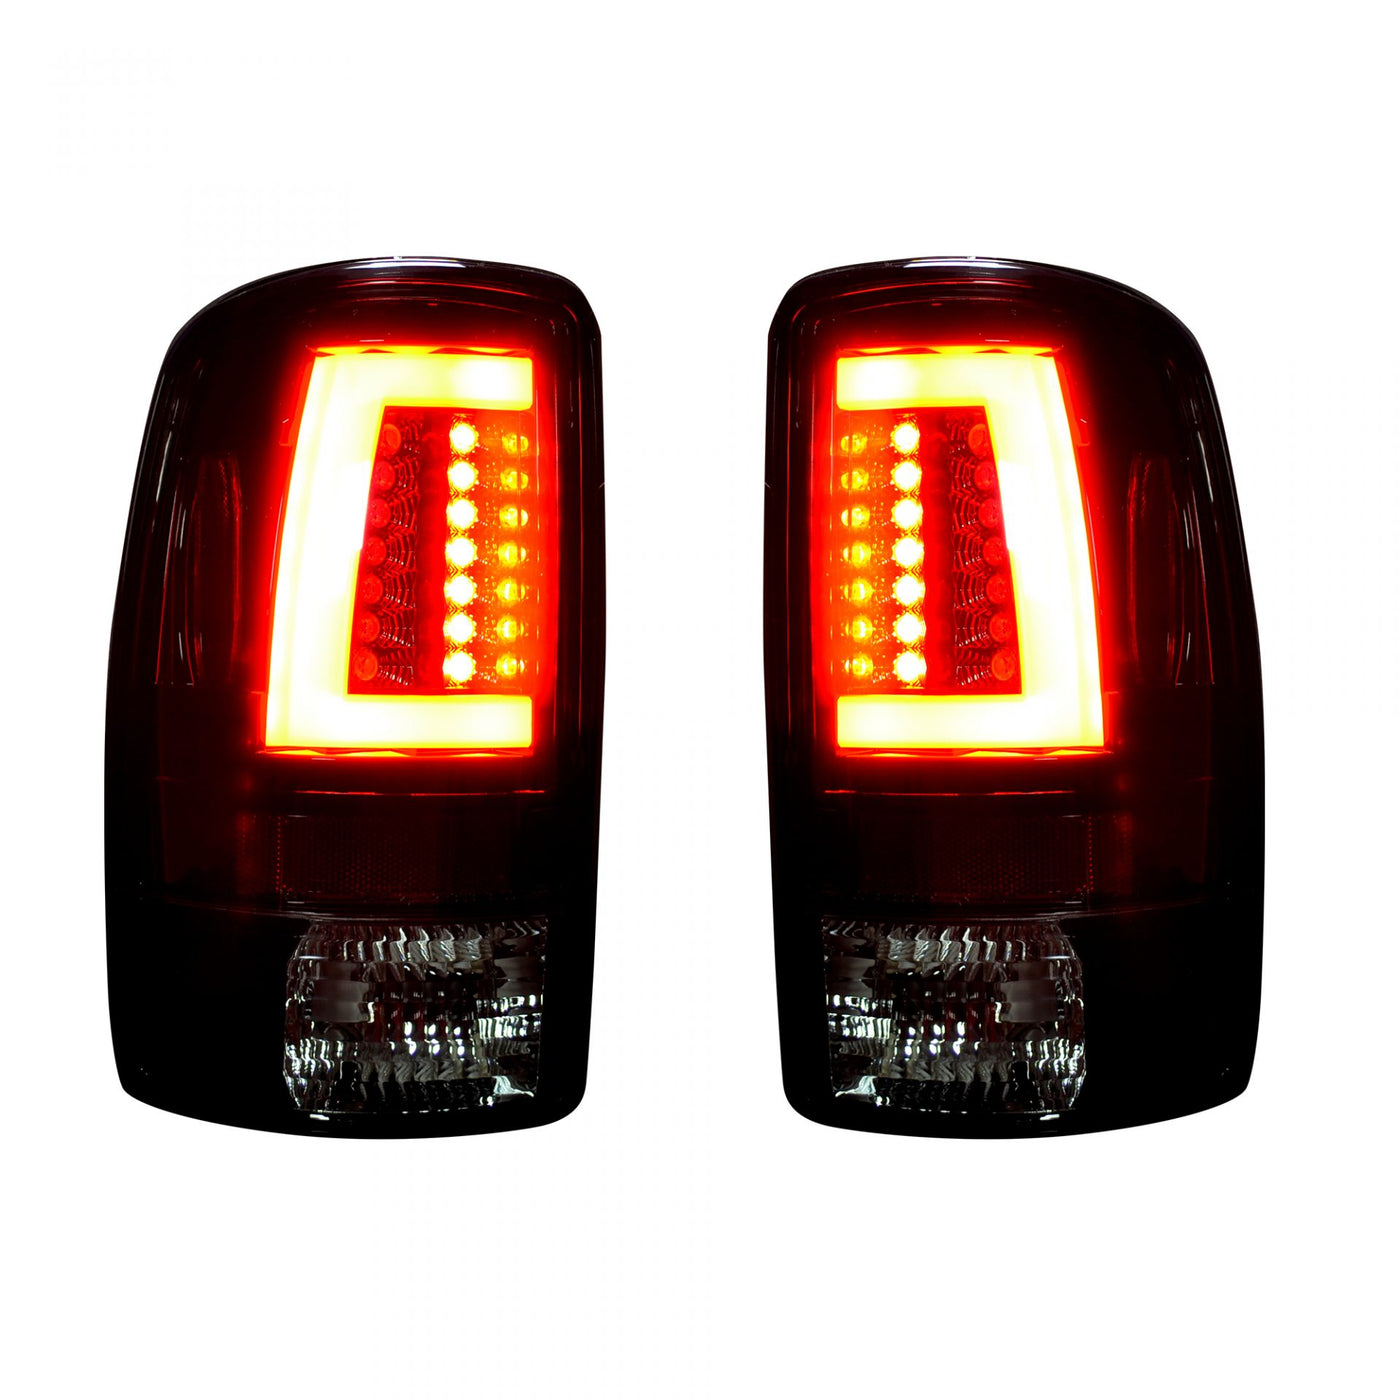 Chevy Tahoe Tail Lights, Chevy Suburban Tail Lights, GMC Yukon Tail Lights, GMC Denali Tail Lights, Tail Lights, Smoked Tail Lights, Recon Tail Lights